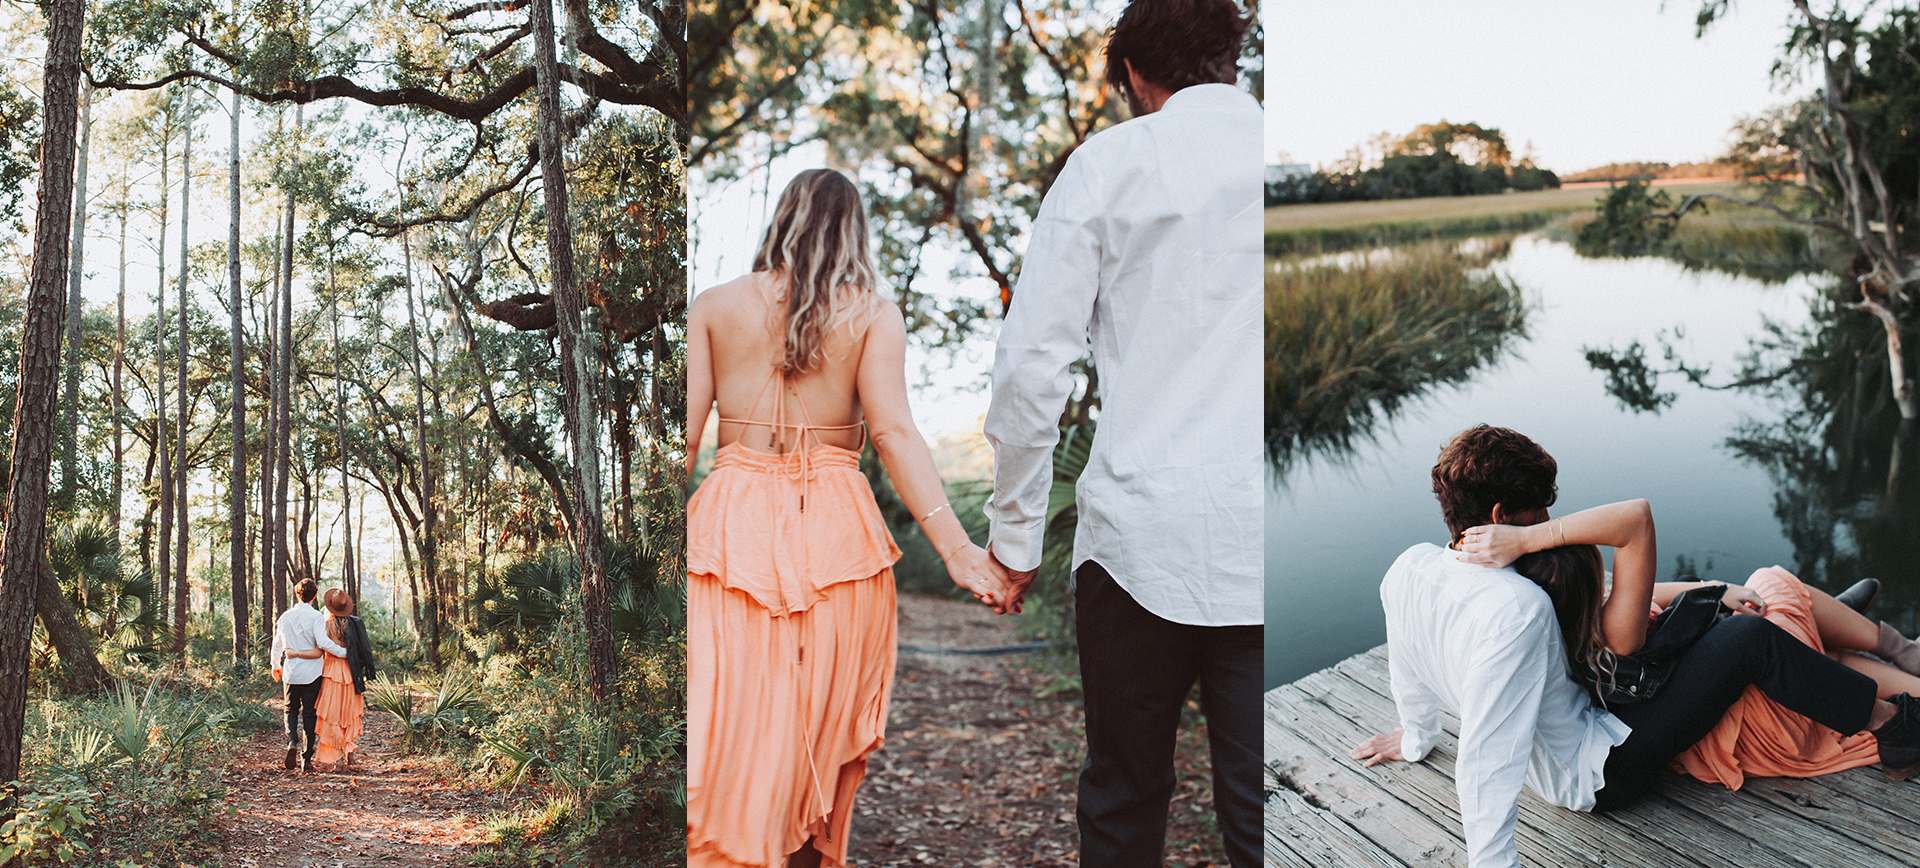 charleston photoshoot - couple in forest and wetland